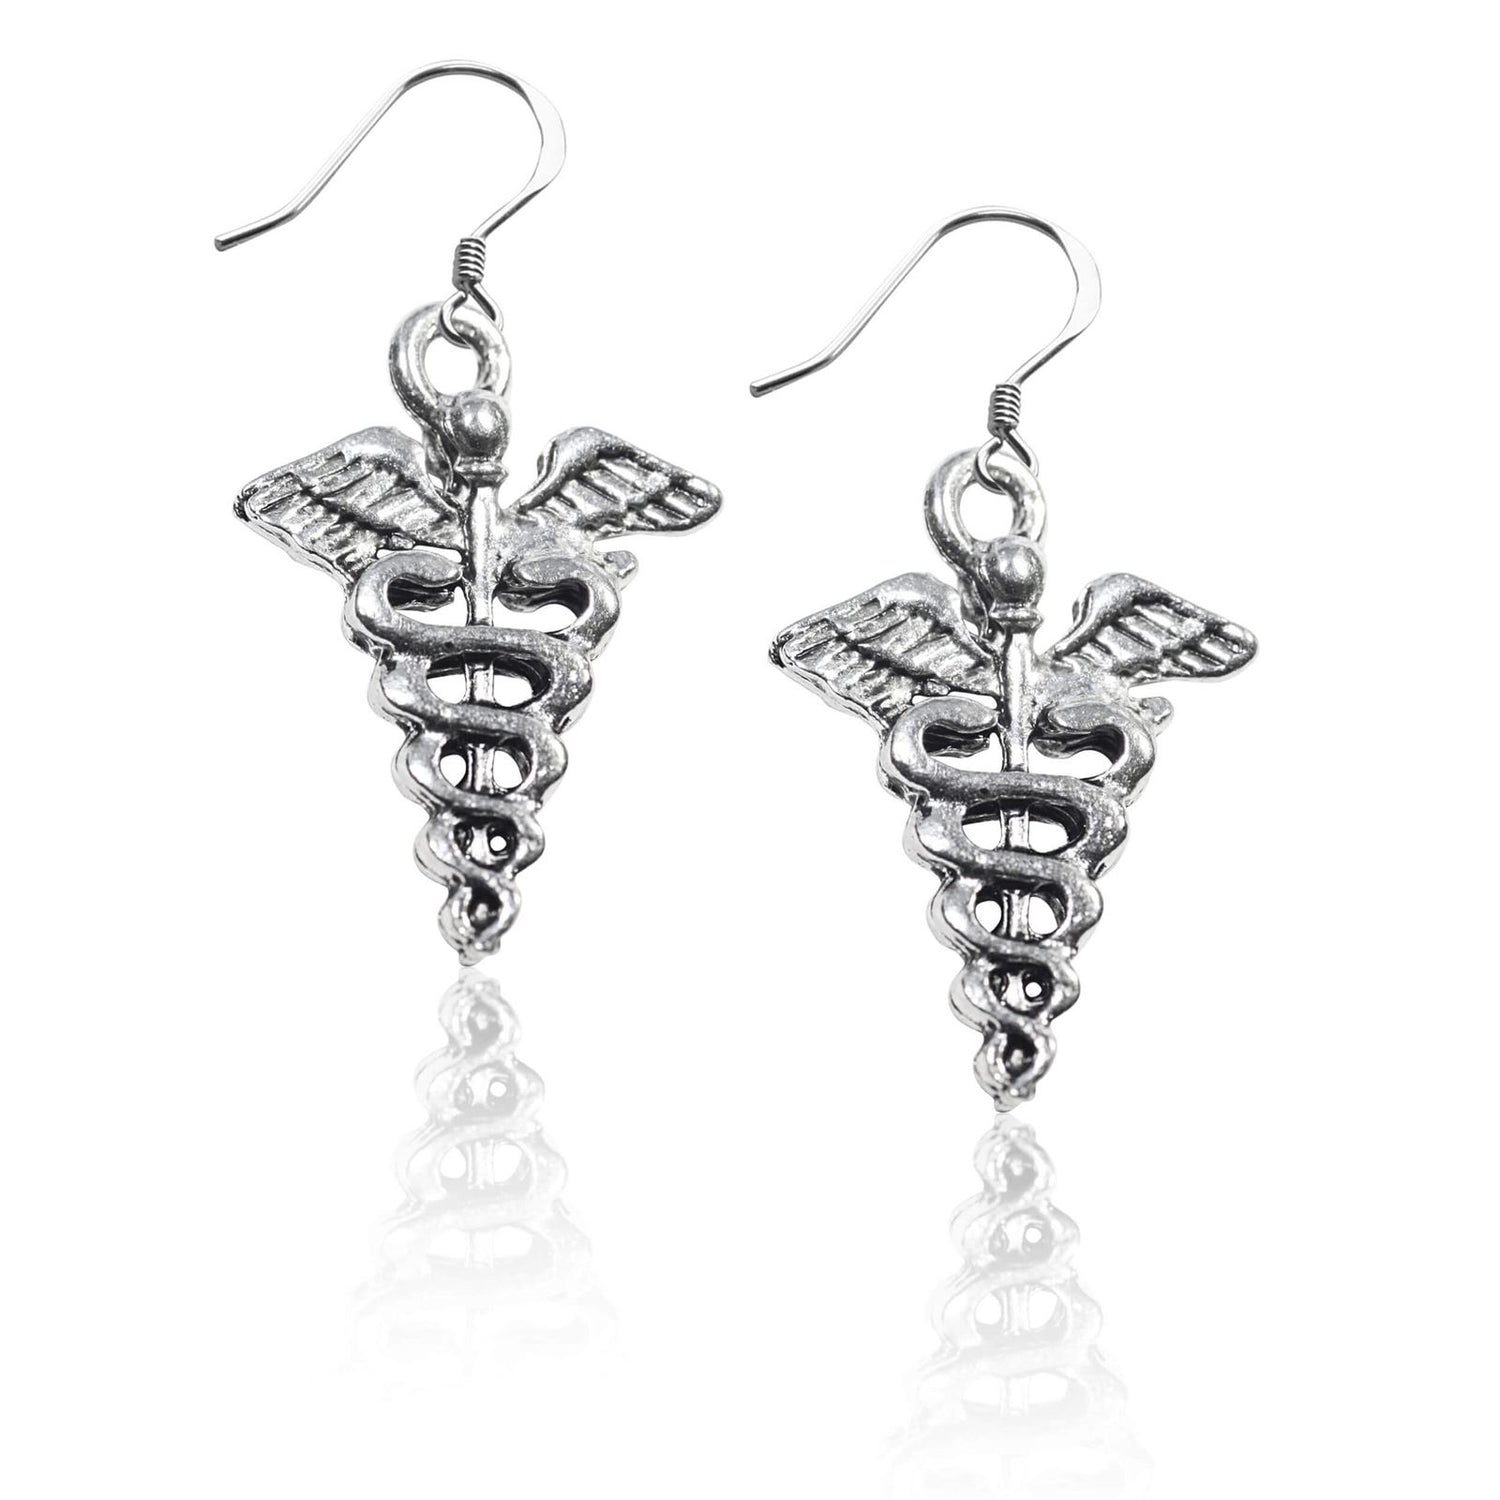 Whimsical Gifts | Medical Symbol Charm Earrings in Silver Finish | Professions Themed | Dental | Medical | First Responder | Jewelry